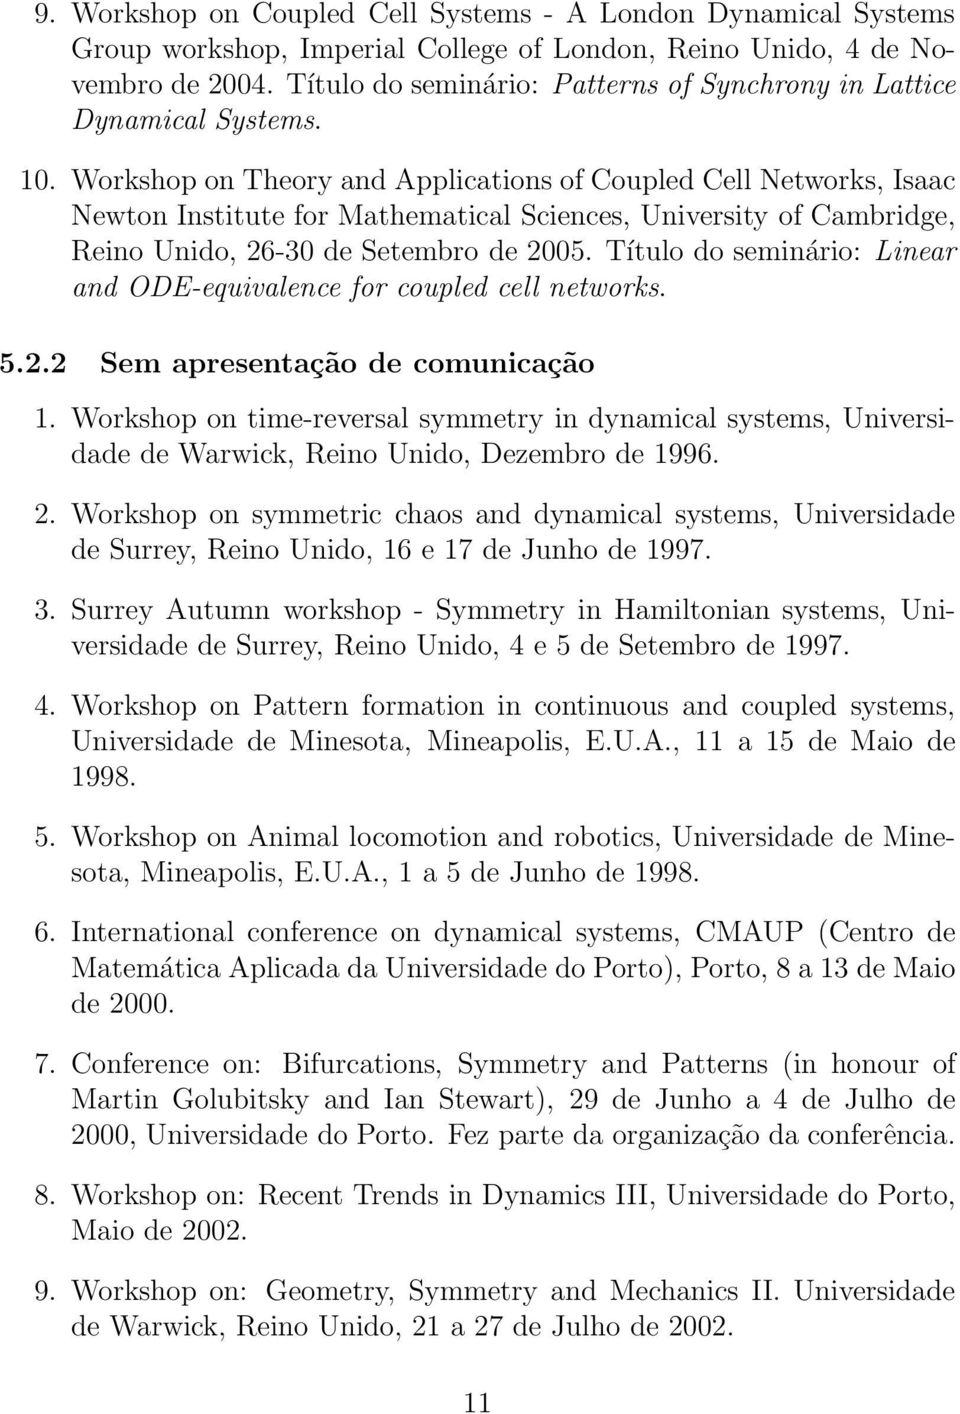 Workshop on Theory and Applications of Coupled Cell Networks, Isaac Newton Institute for Mathematical Sciences, University of Cambridge, Reino Unido, 26-30 de Setembro de 2005.